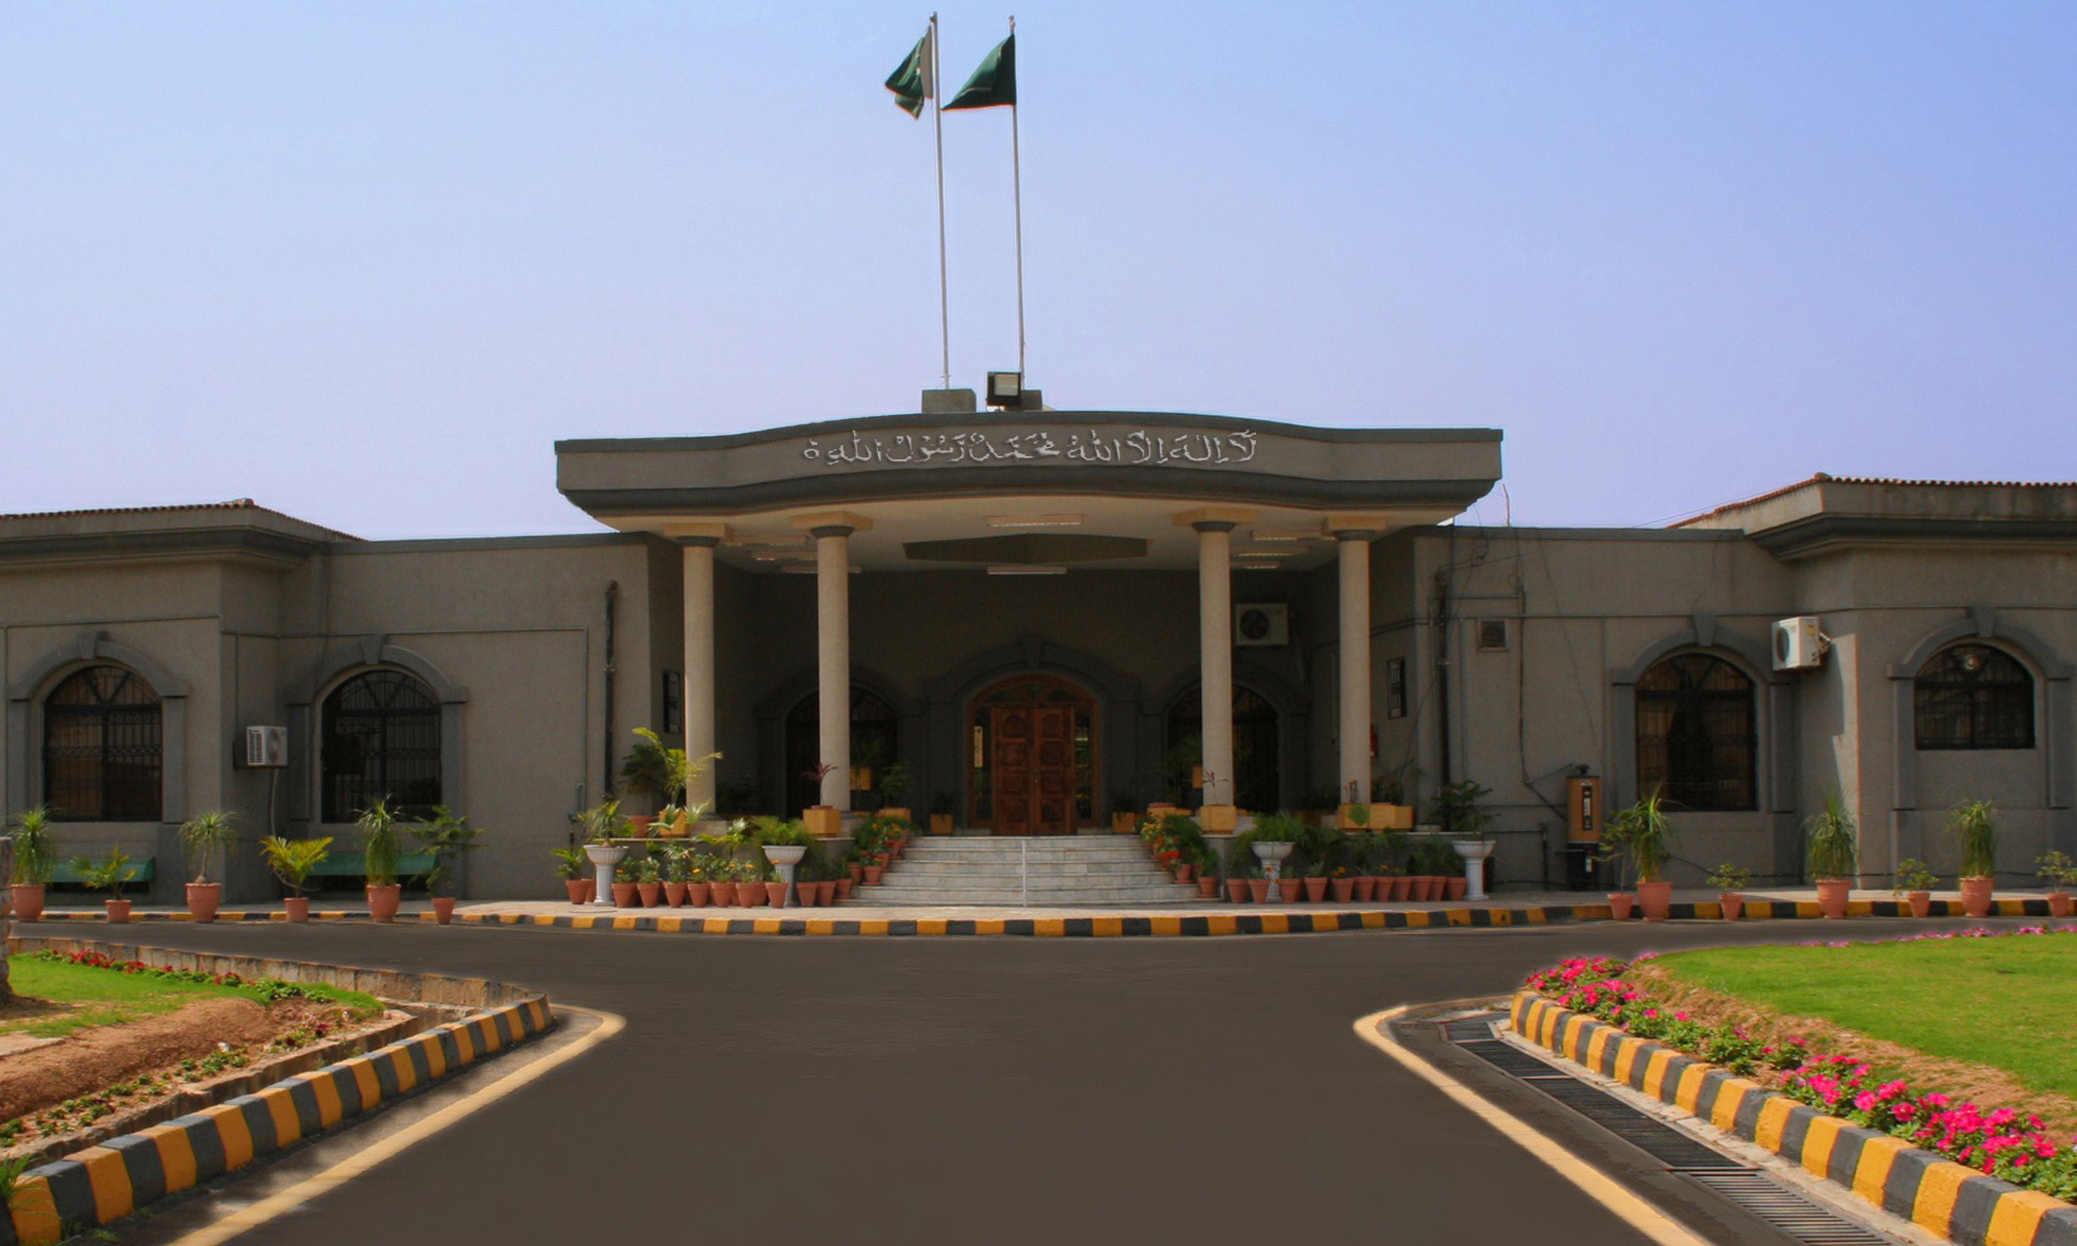 Blasphemy case: IHC orders putting names of those involved in ECL